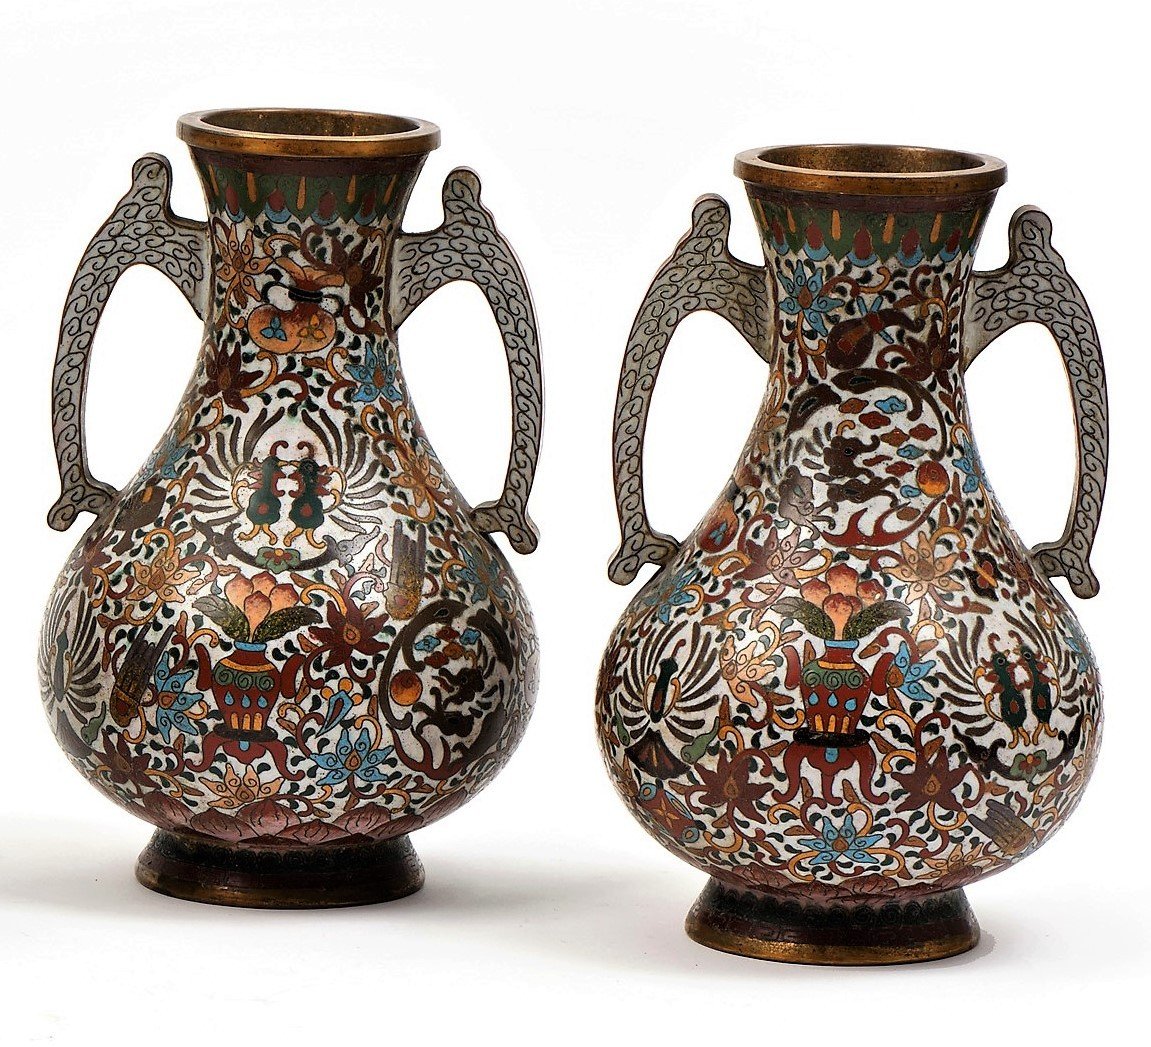 Japan 19th Century Set Of Two Bronze And Cloisonné Enamel Vases And An Incense Burner-photo-4